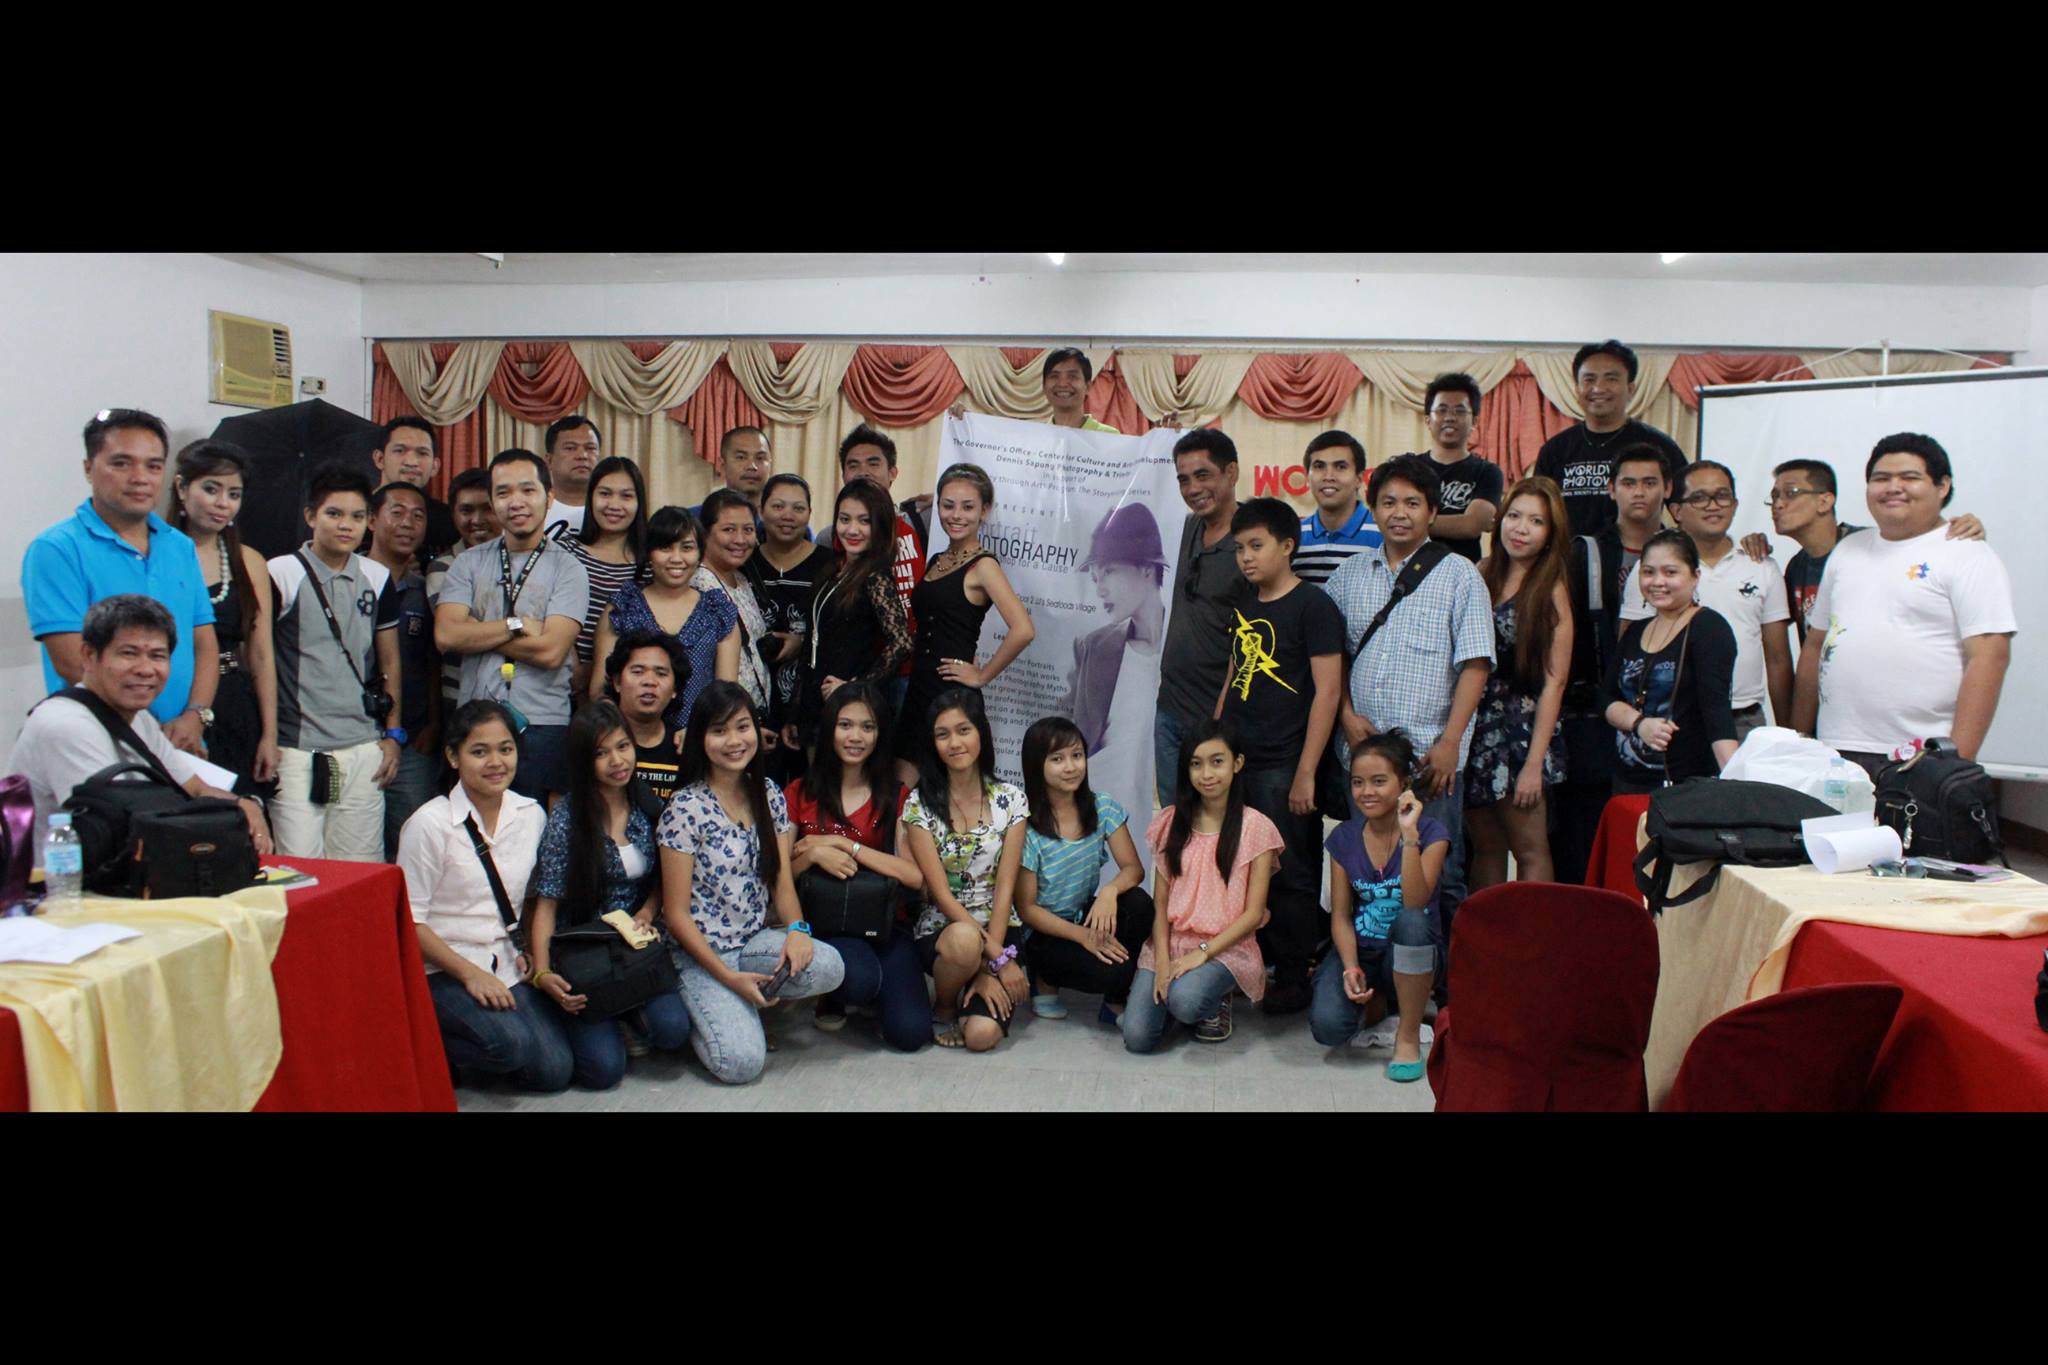 GO-CCAD Conducts Portraiture Workshop for a Cause